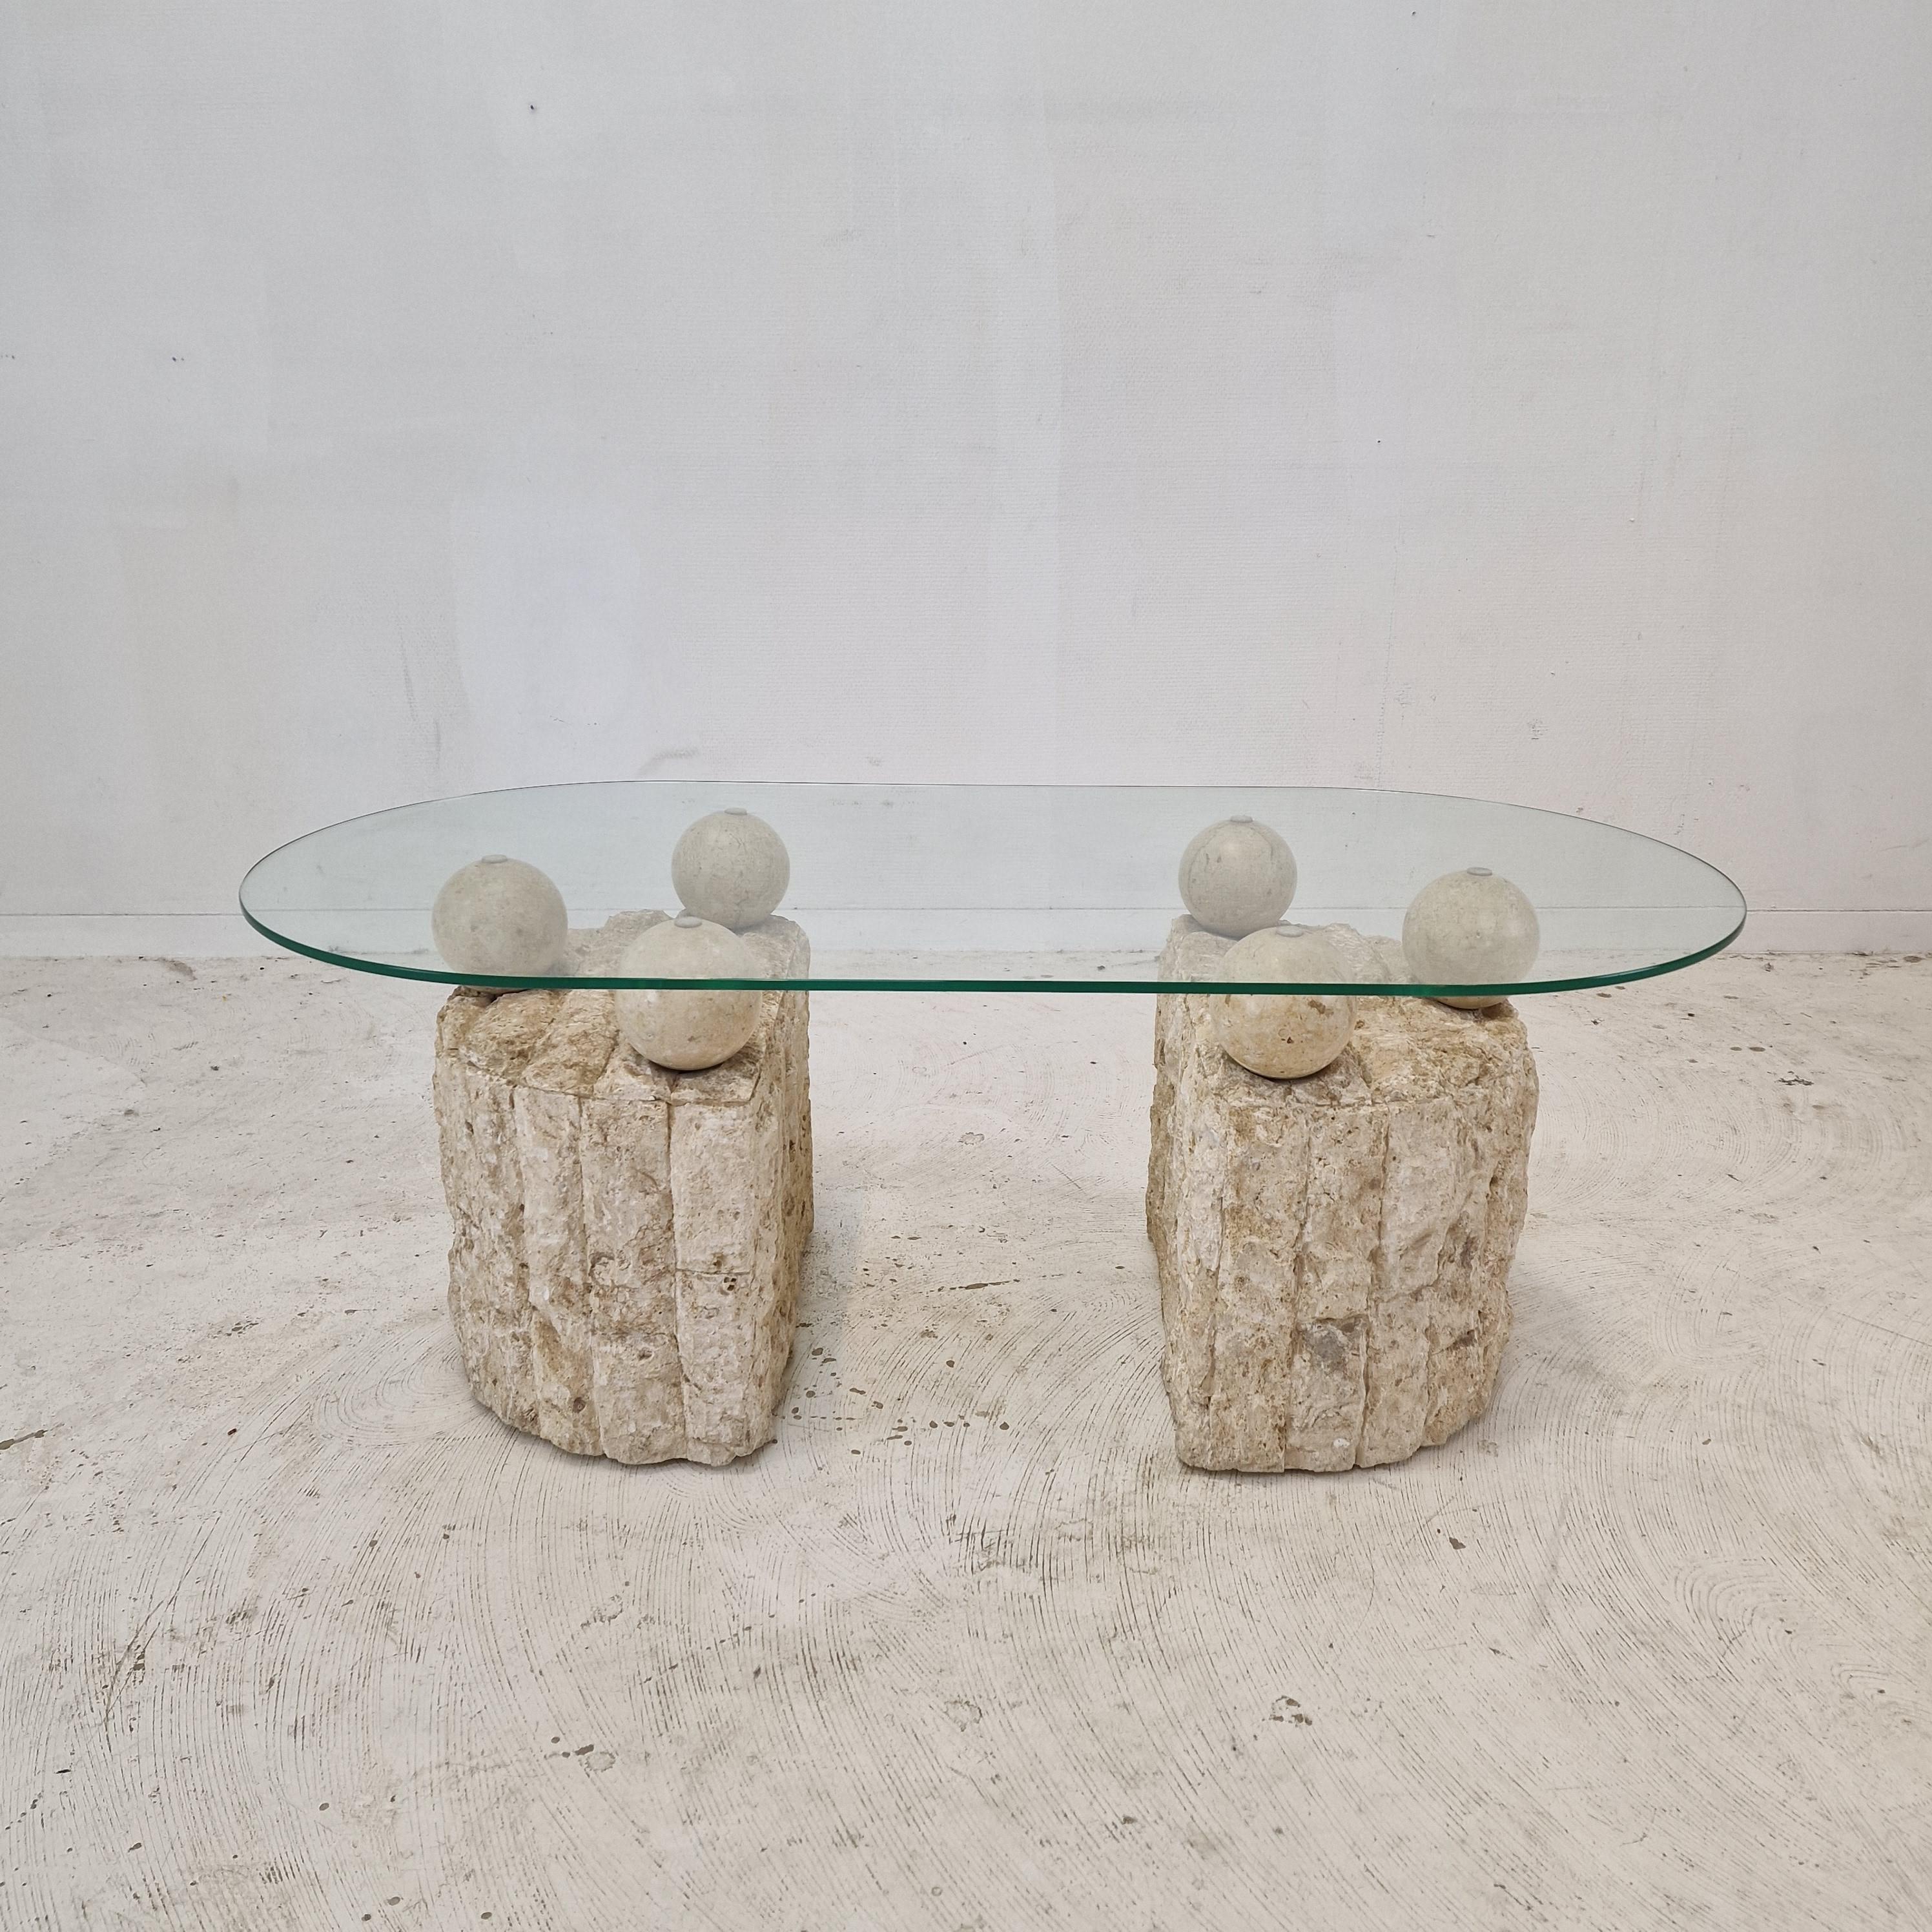 Magnussen Ponte Mactan Stone Coffee or Fossil Stone Table, 1980s In Good Condition For Sale In Oud Beijerland, NL